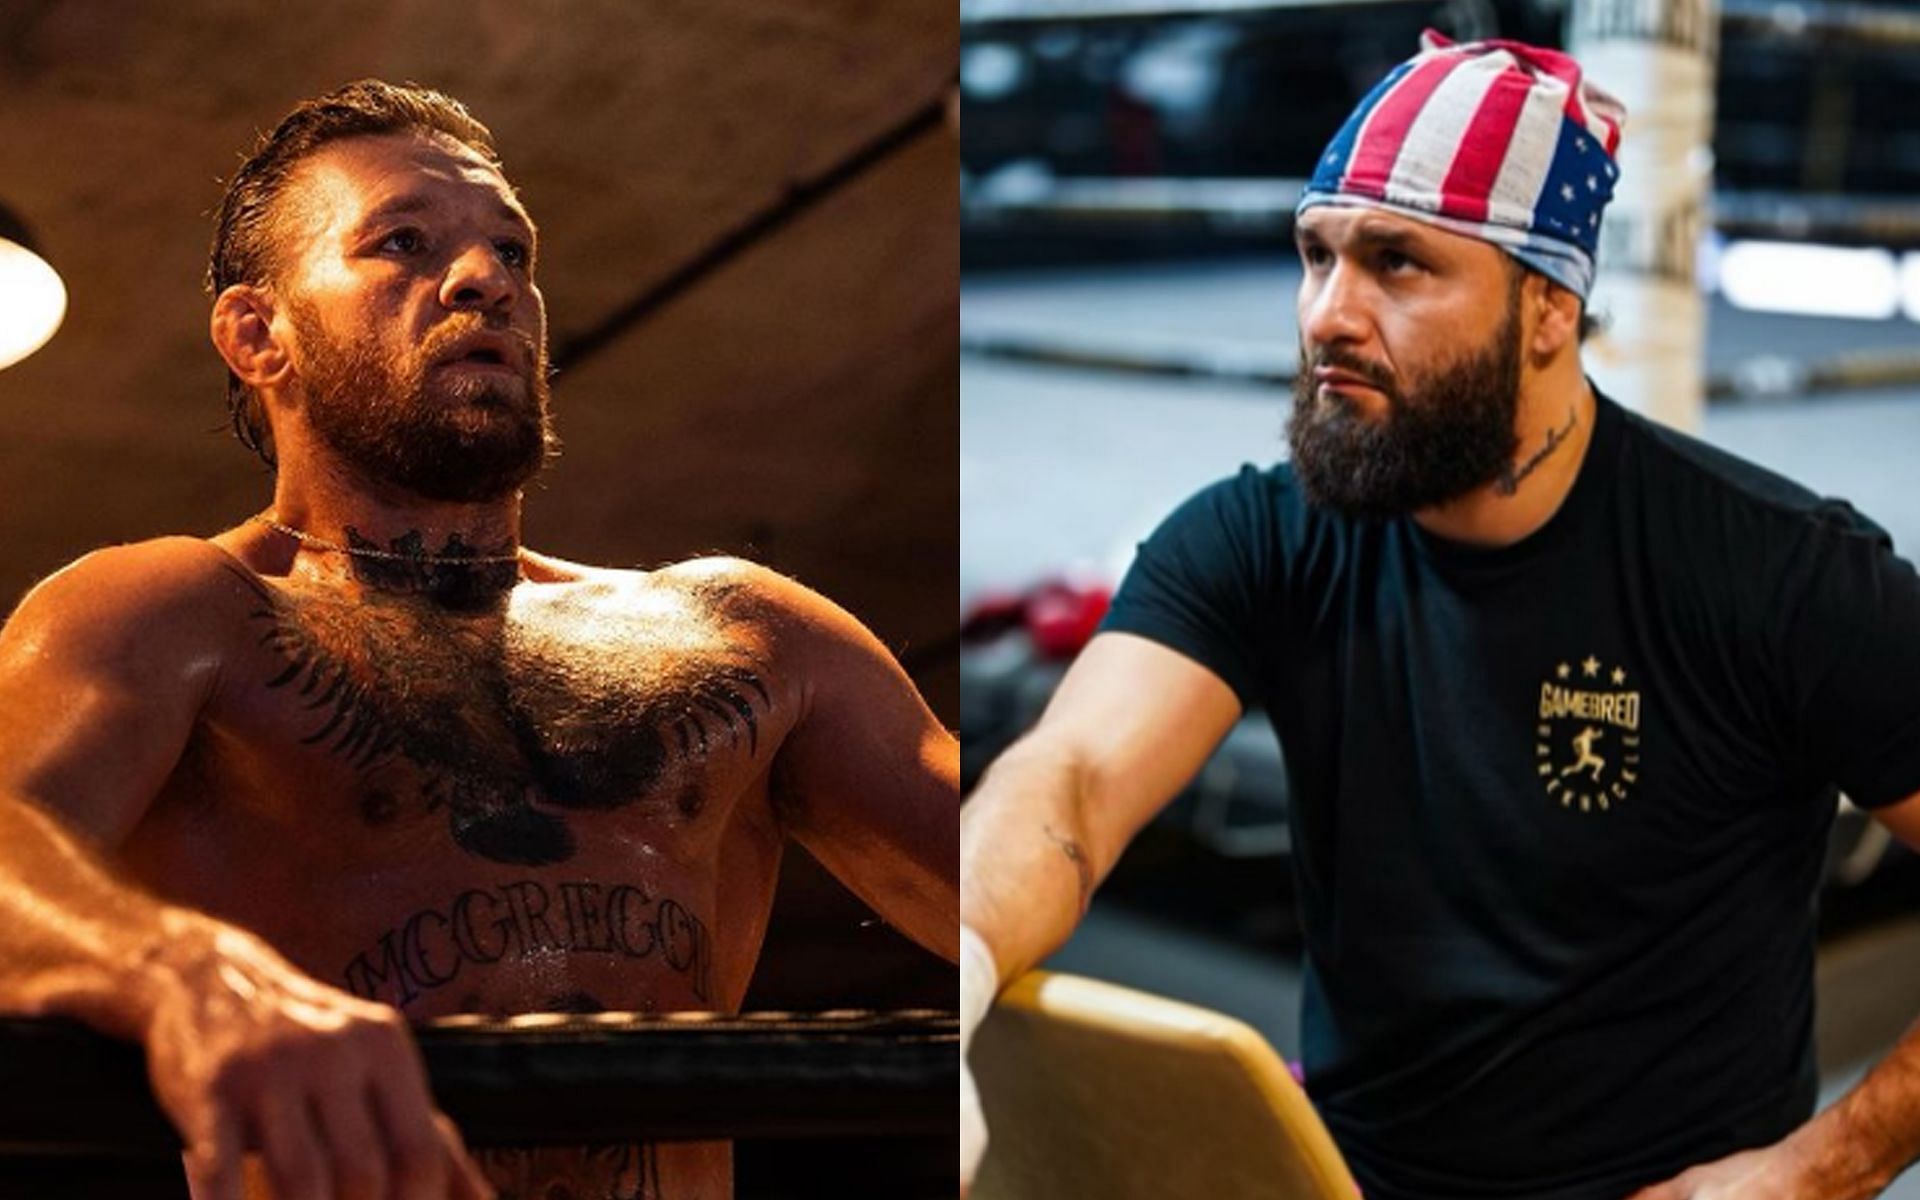 Conor McGregor (left) vs. Jorge Masvidal (right) has been one of the highly anticipated fights that never happened under the UFC umbrella [Images Courtesy: @thenotoriousmma and @gamebredfighter Instagram]